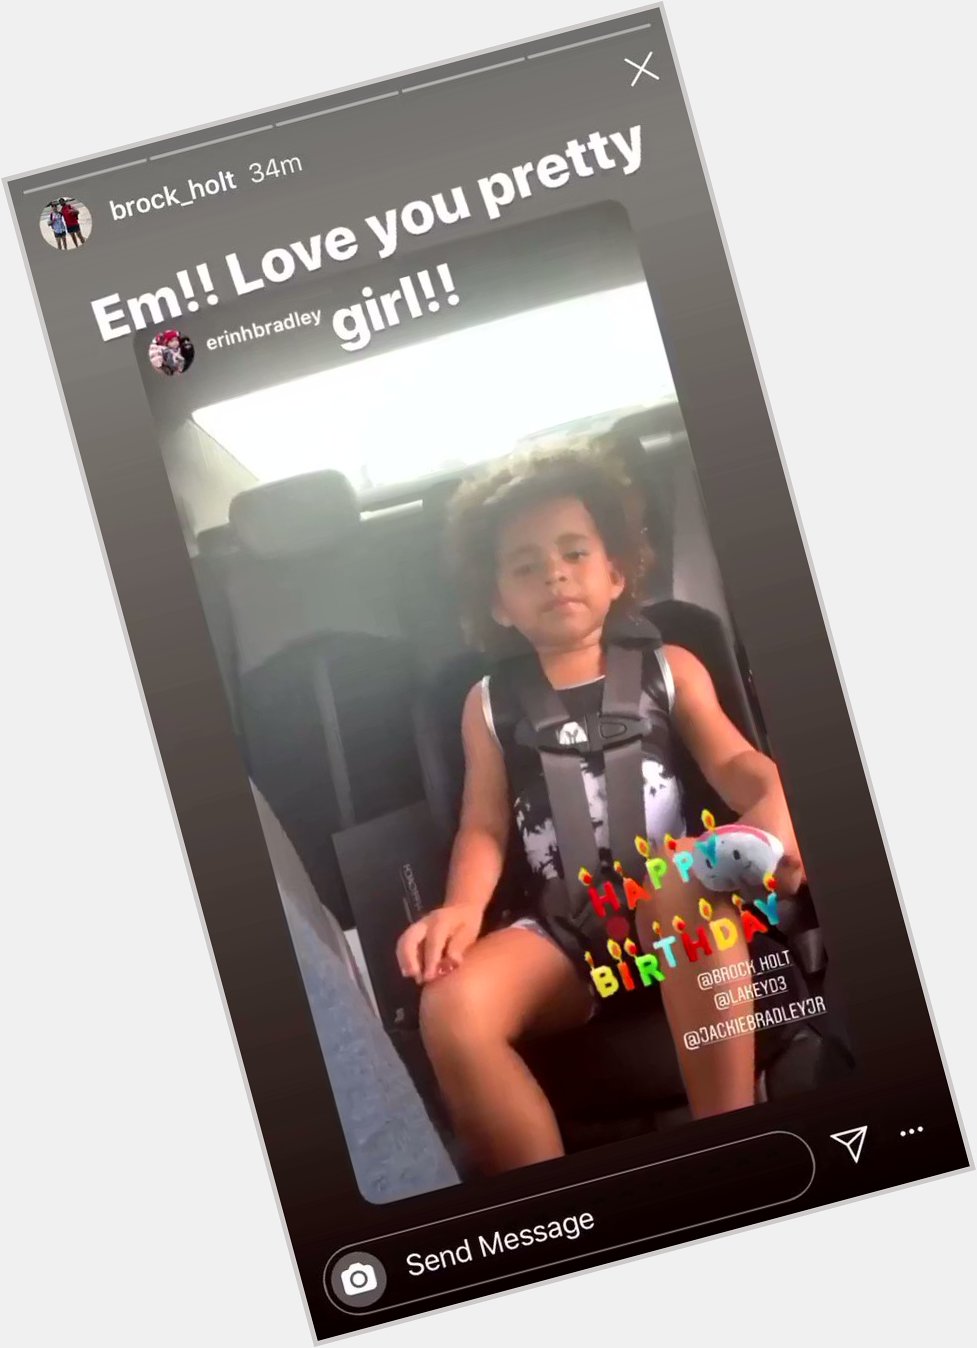 JBJ s daughter Emerson wishing Brock Holt a happy birthday will warm your cold, baseball-less heart. 